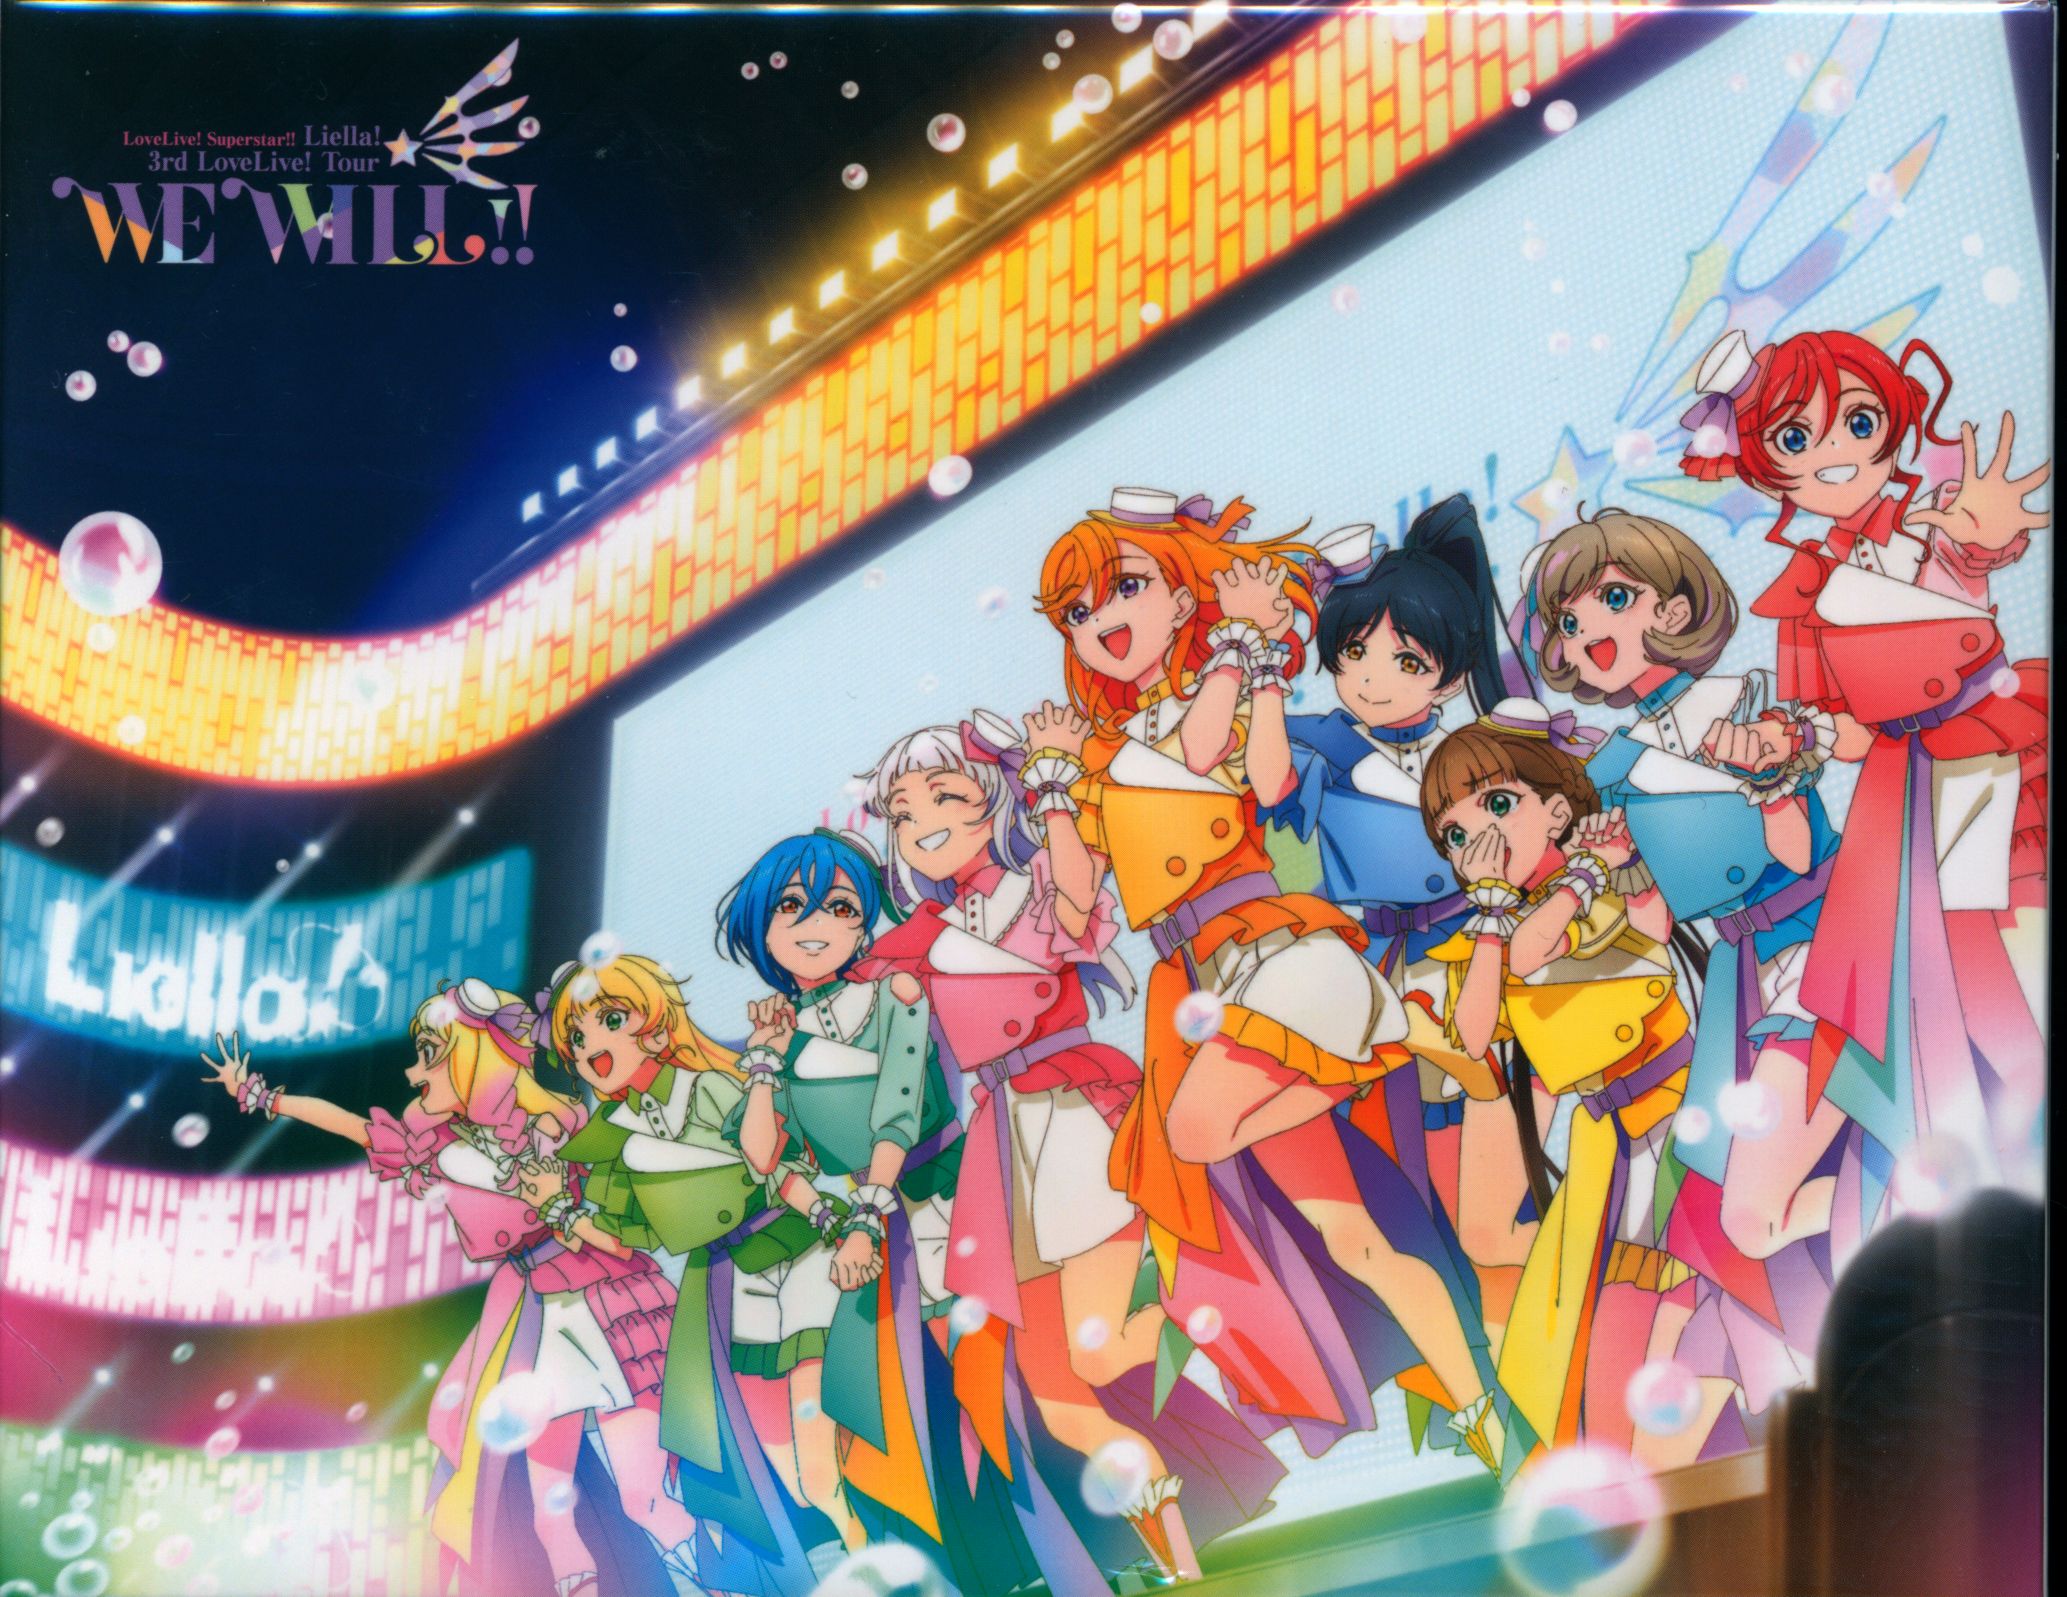 Live/Event Blu-ray sample Edition Liella! 3rd LoveLive! Tour WE